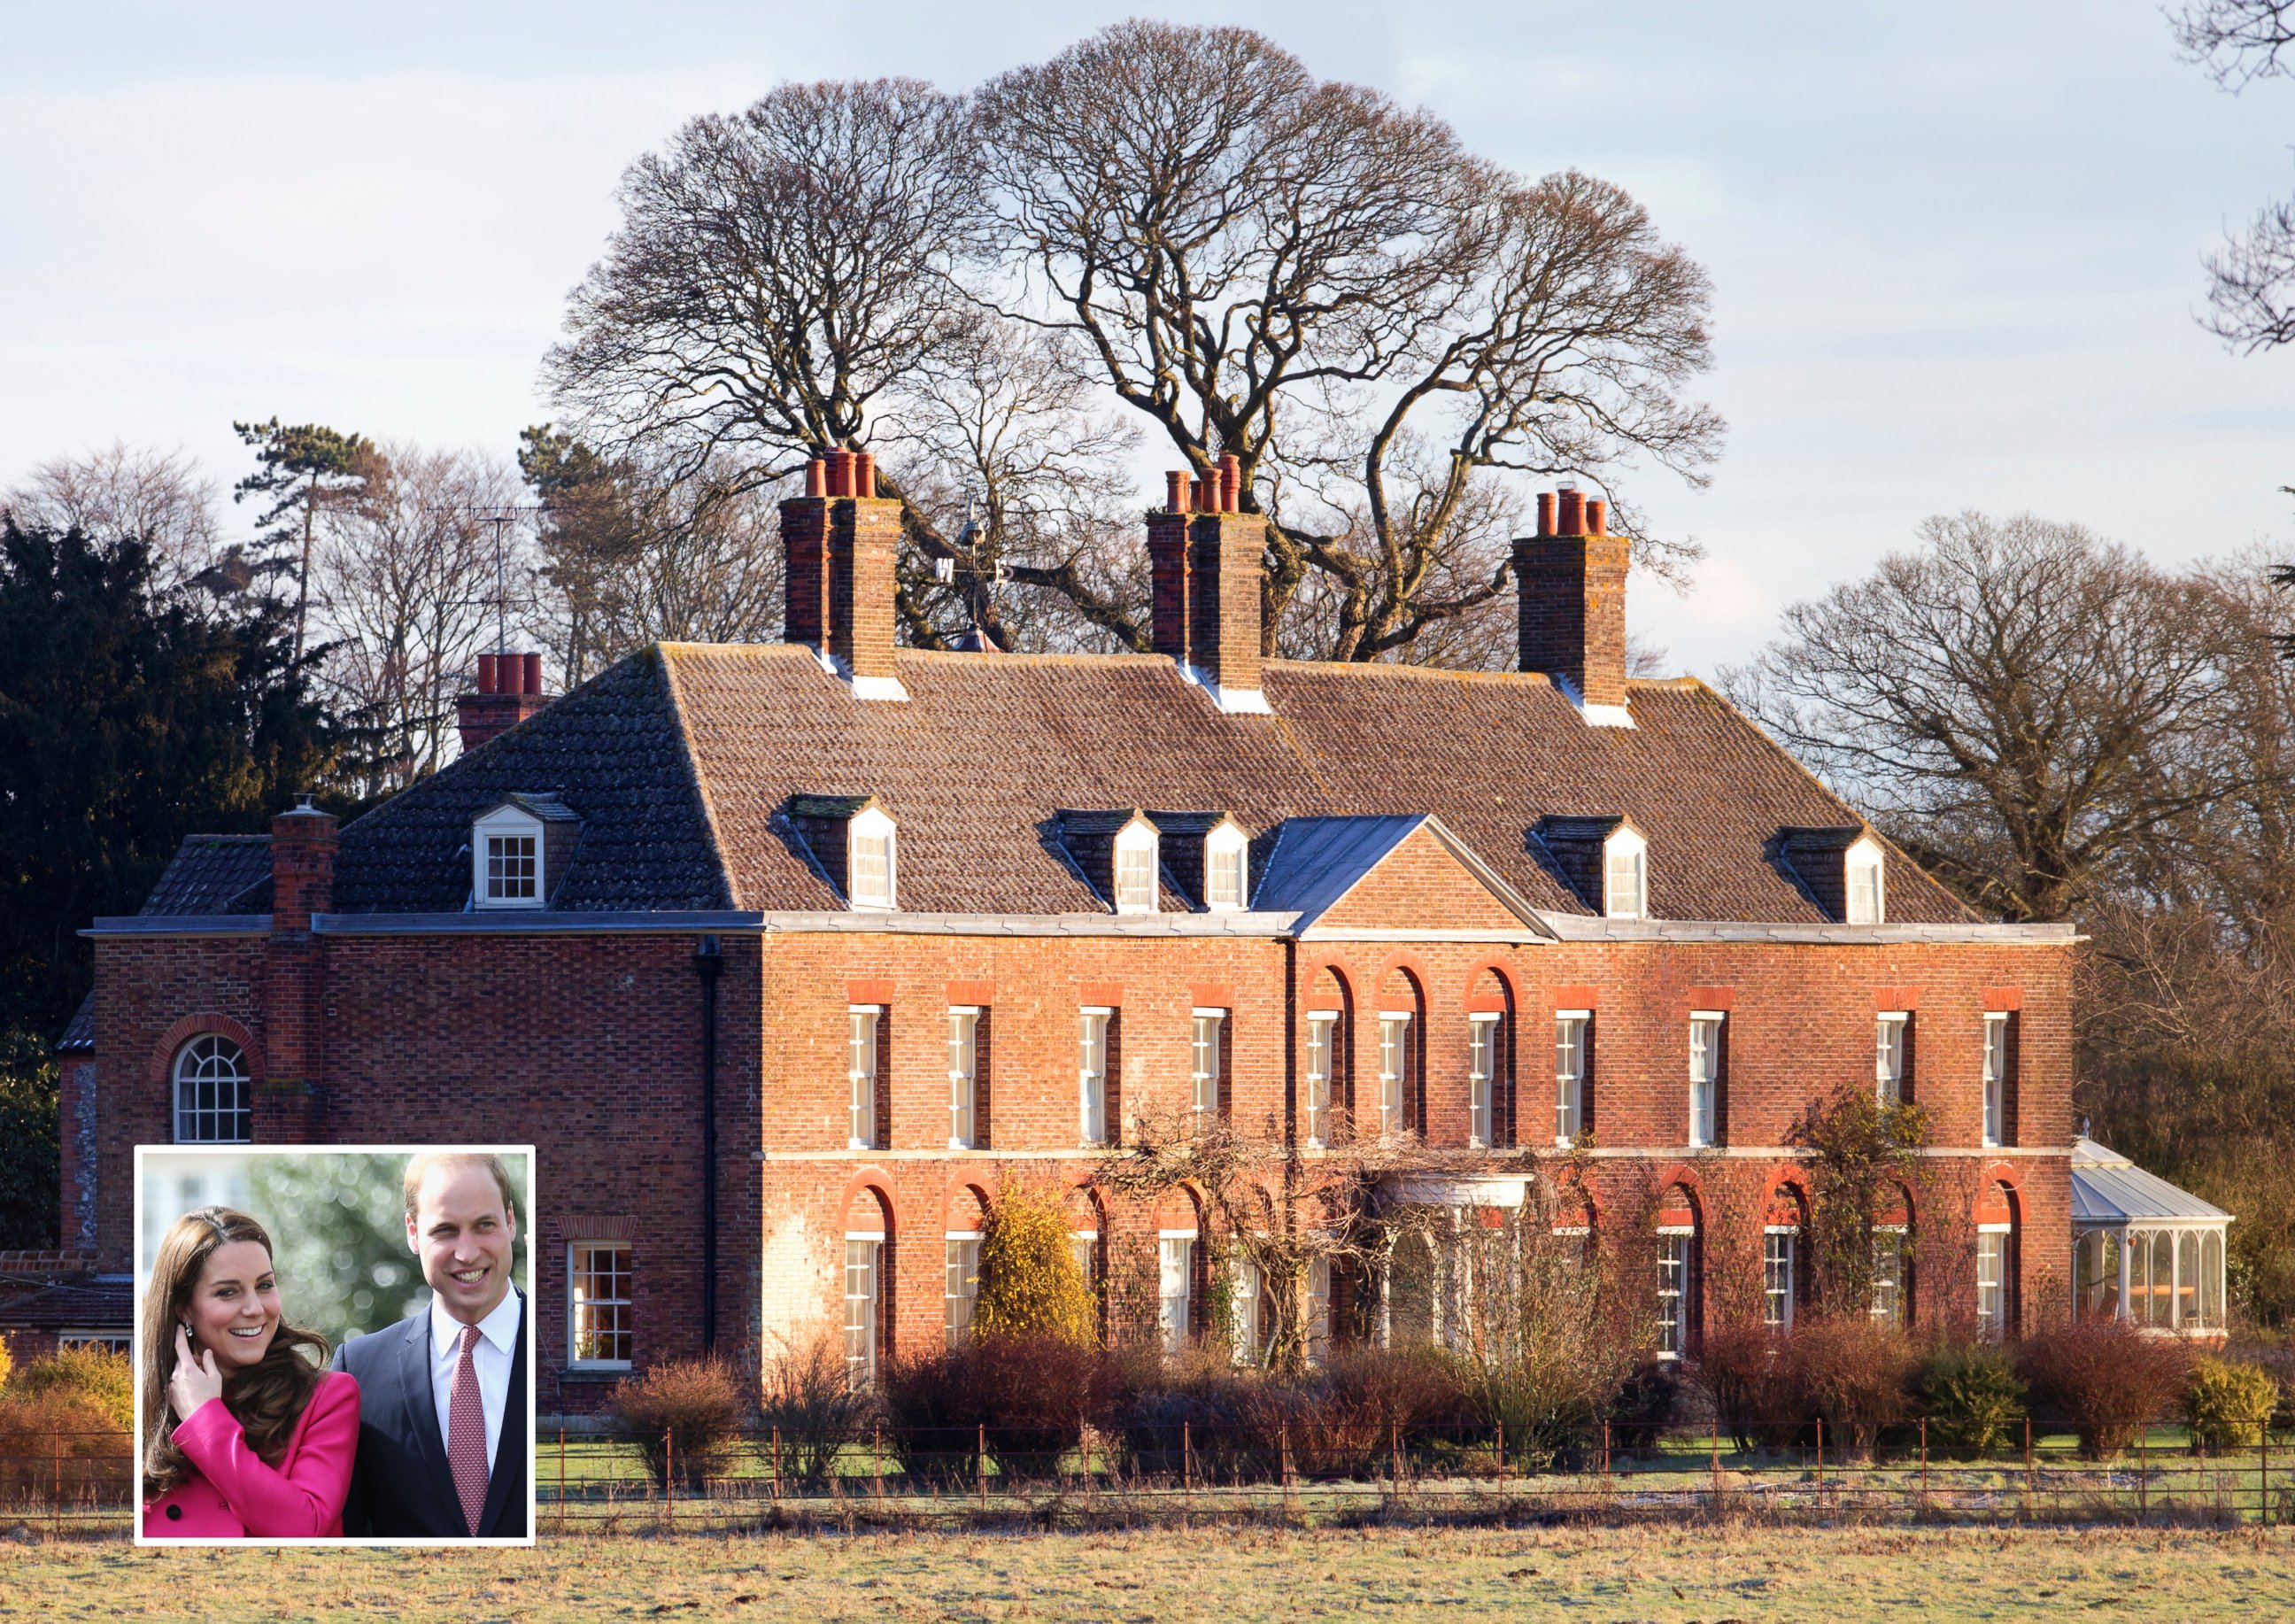 PHOTO: Anmer Hall is Duchess Kate and Prince William's 10-bedroom home on the queen's Sandringham Estate in Norfolk.